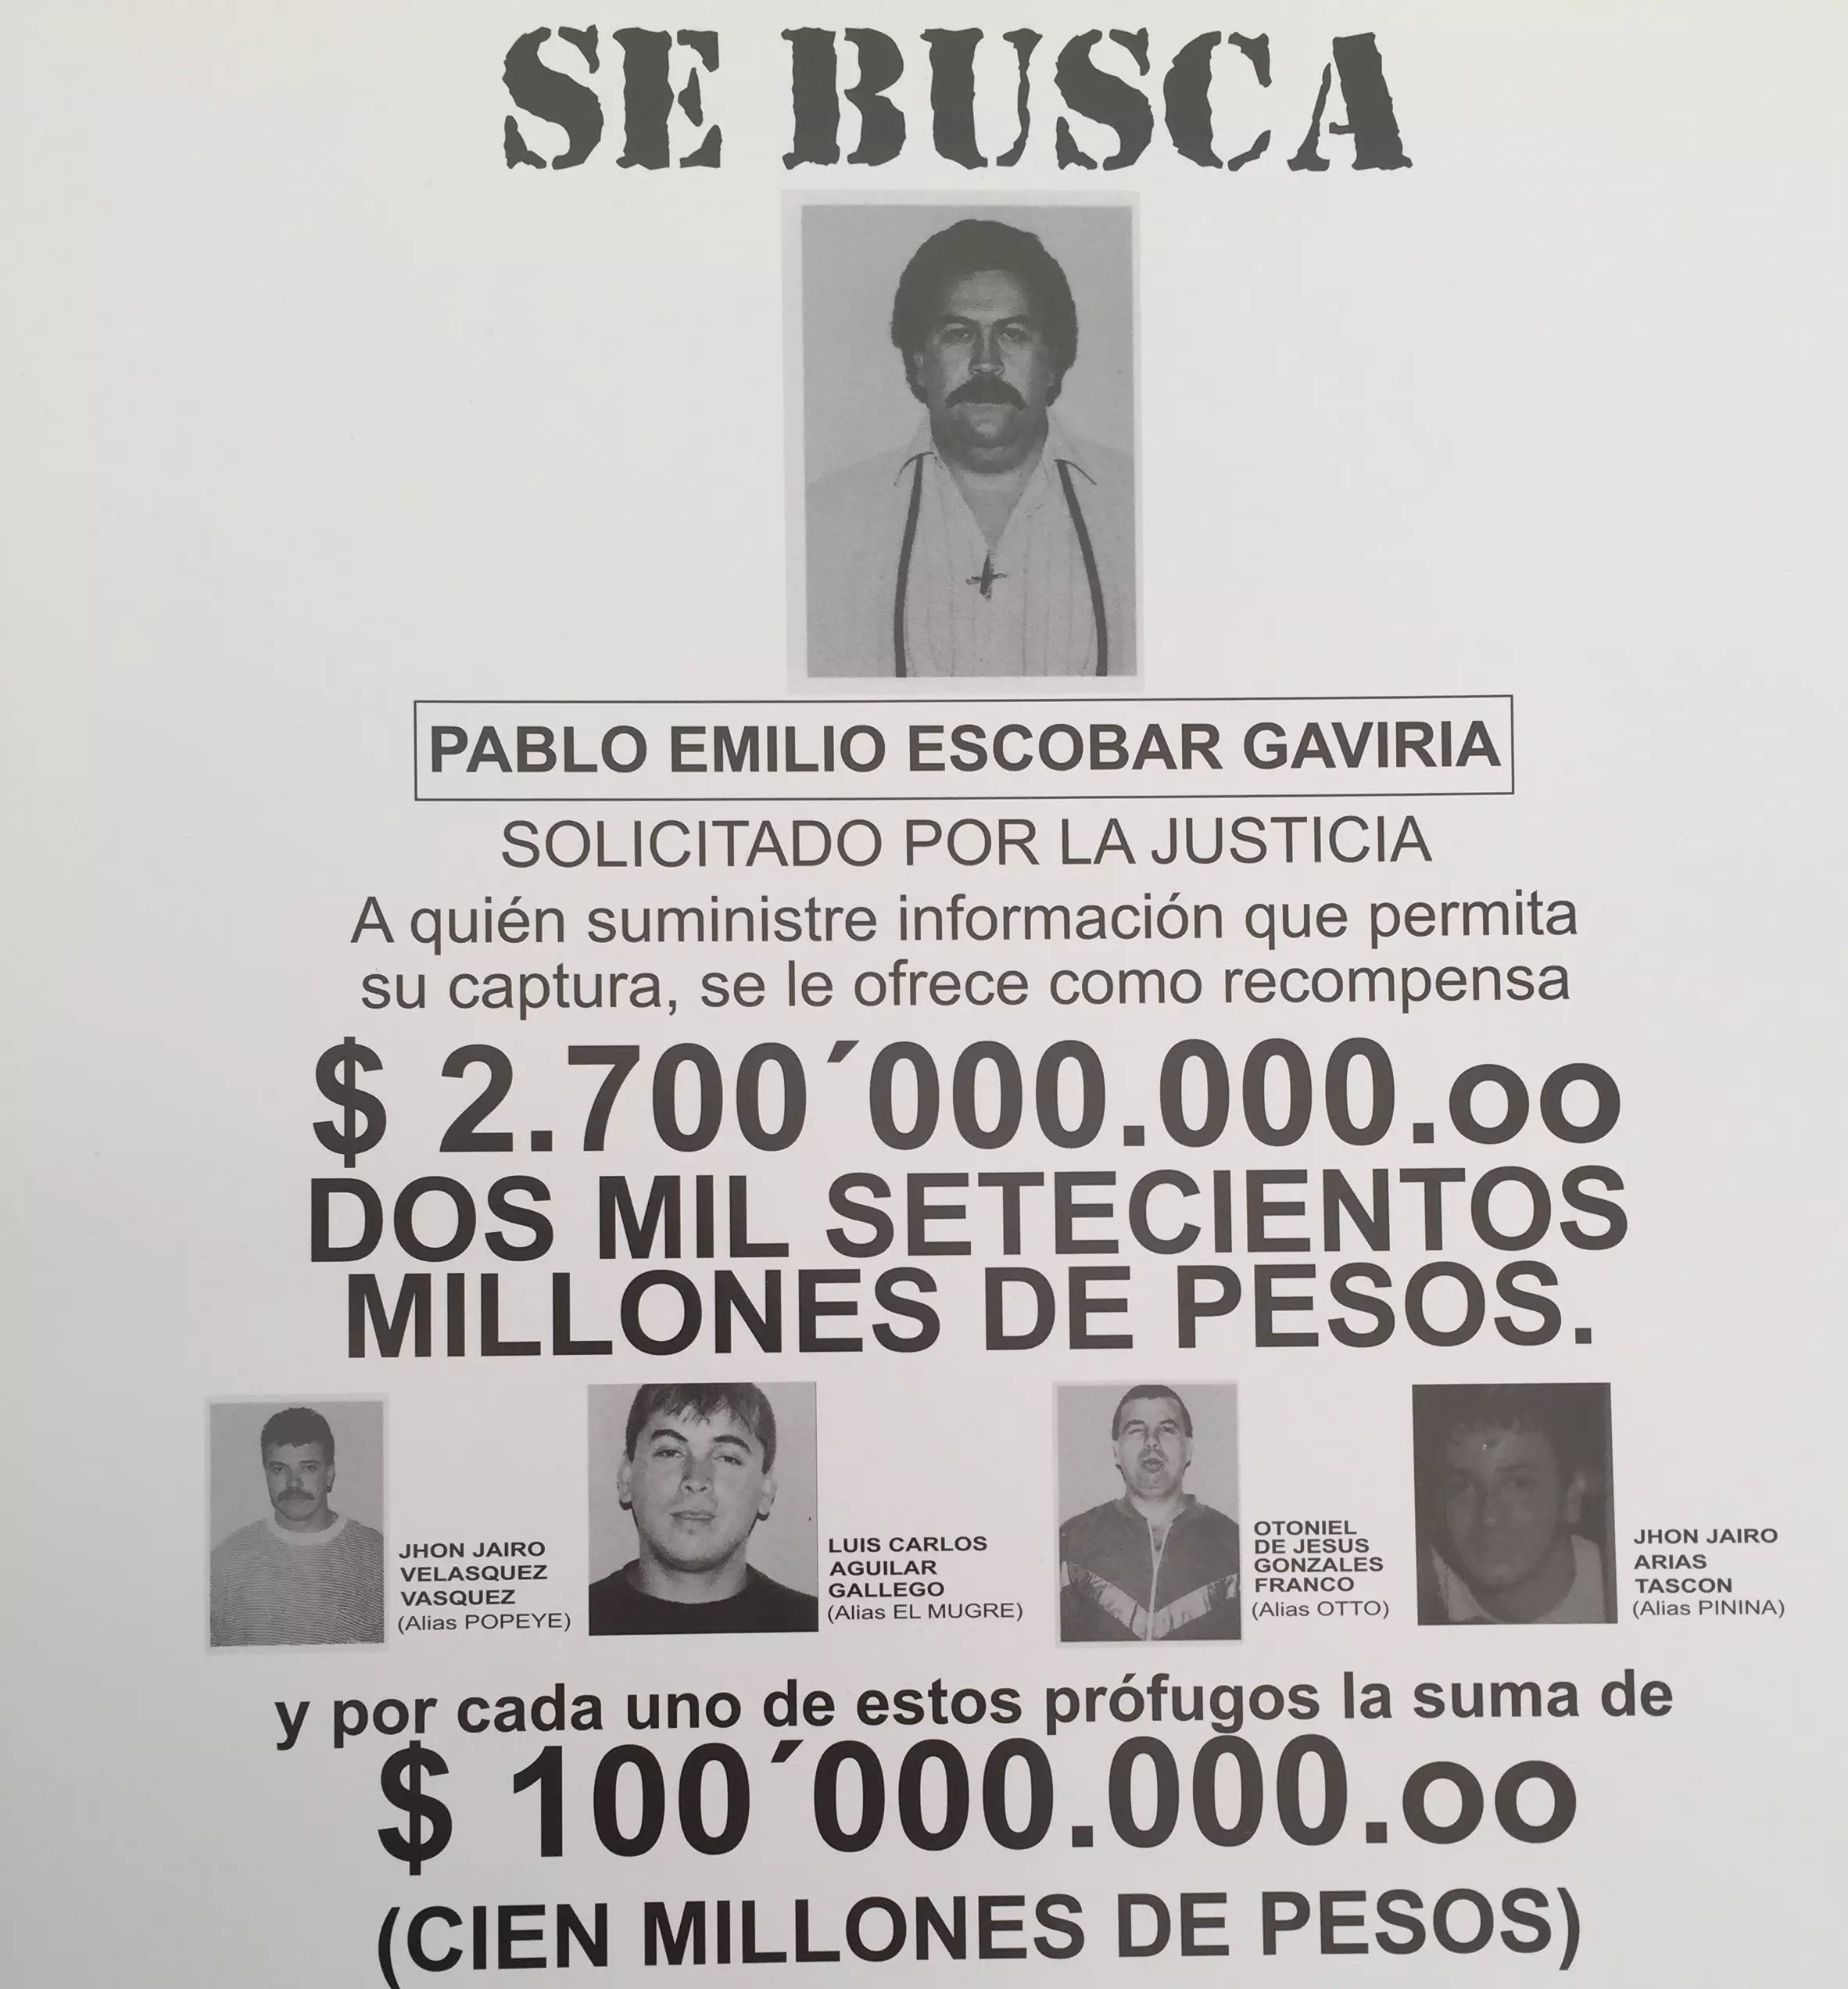 A wanted poster offering a large reward for Pablo Escobar.